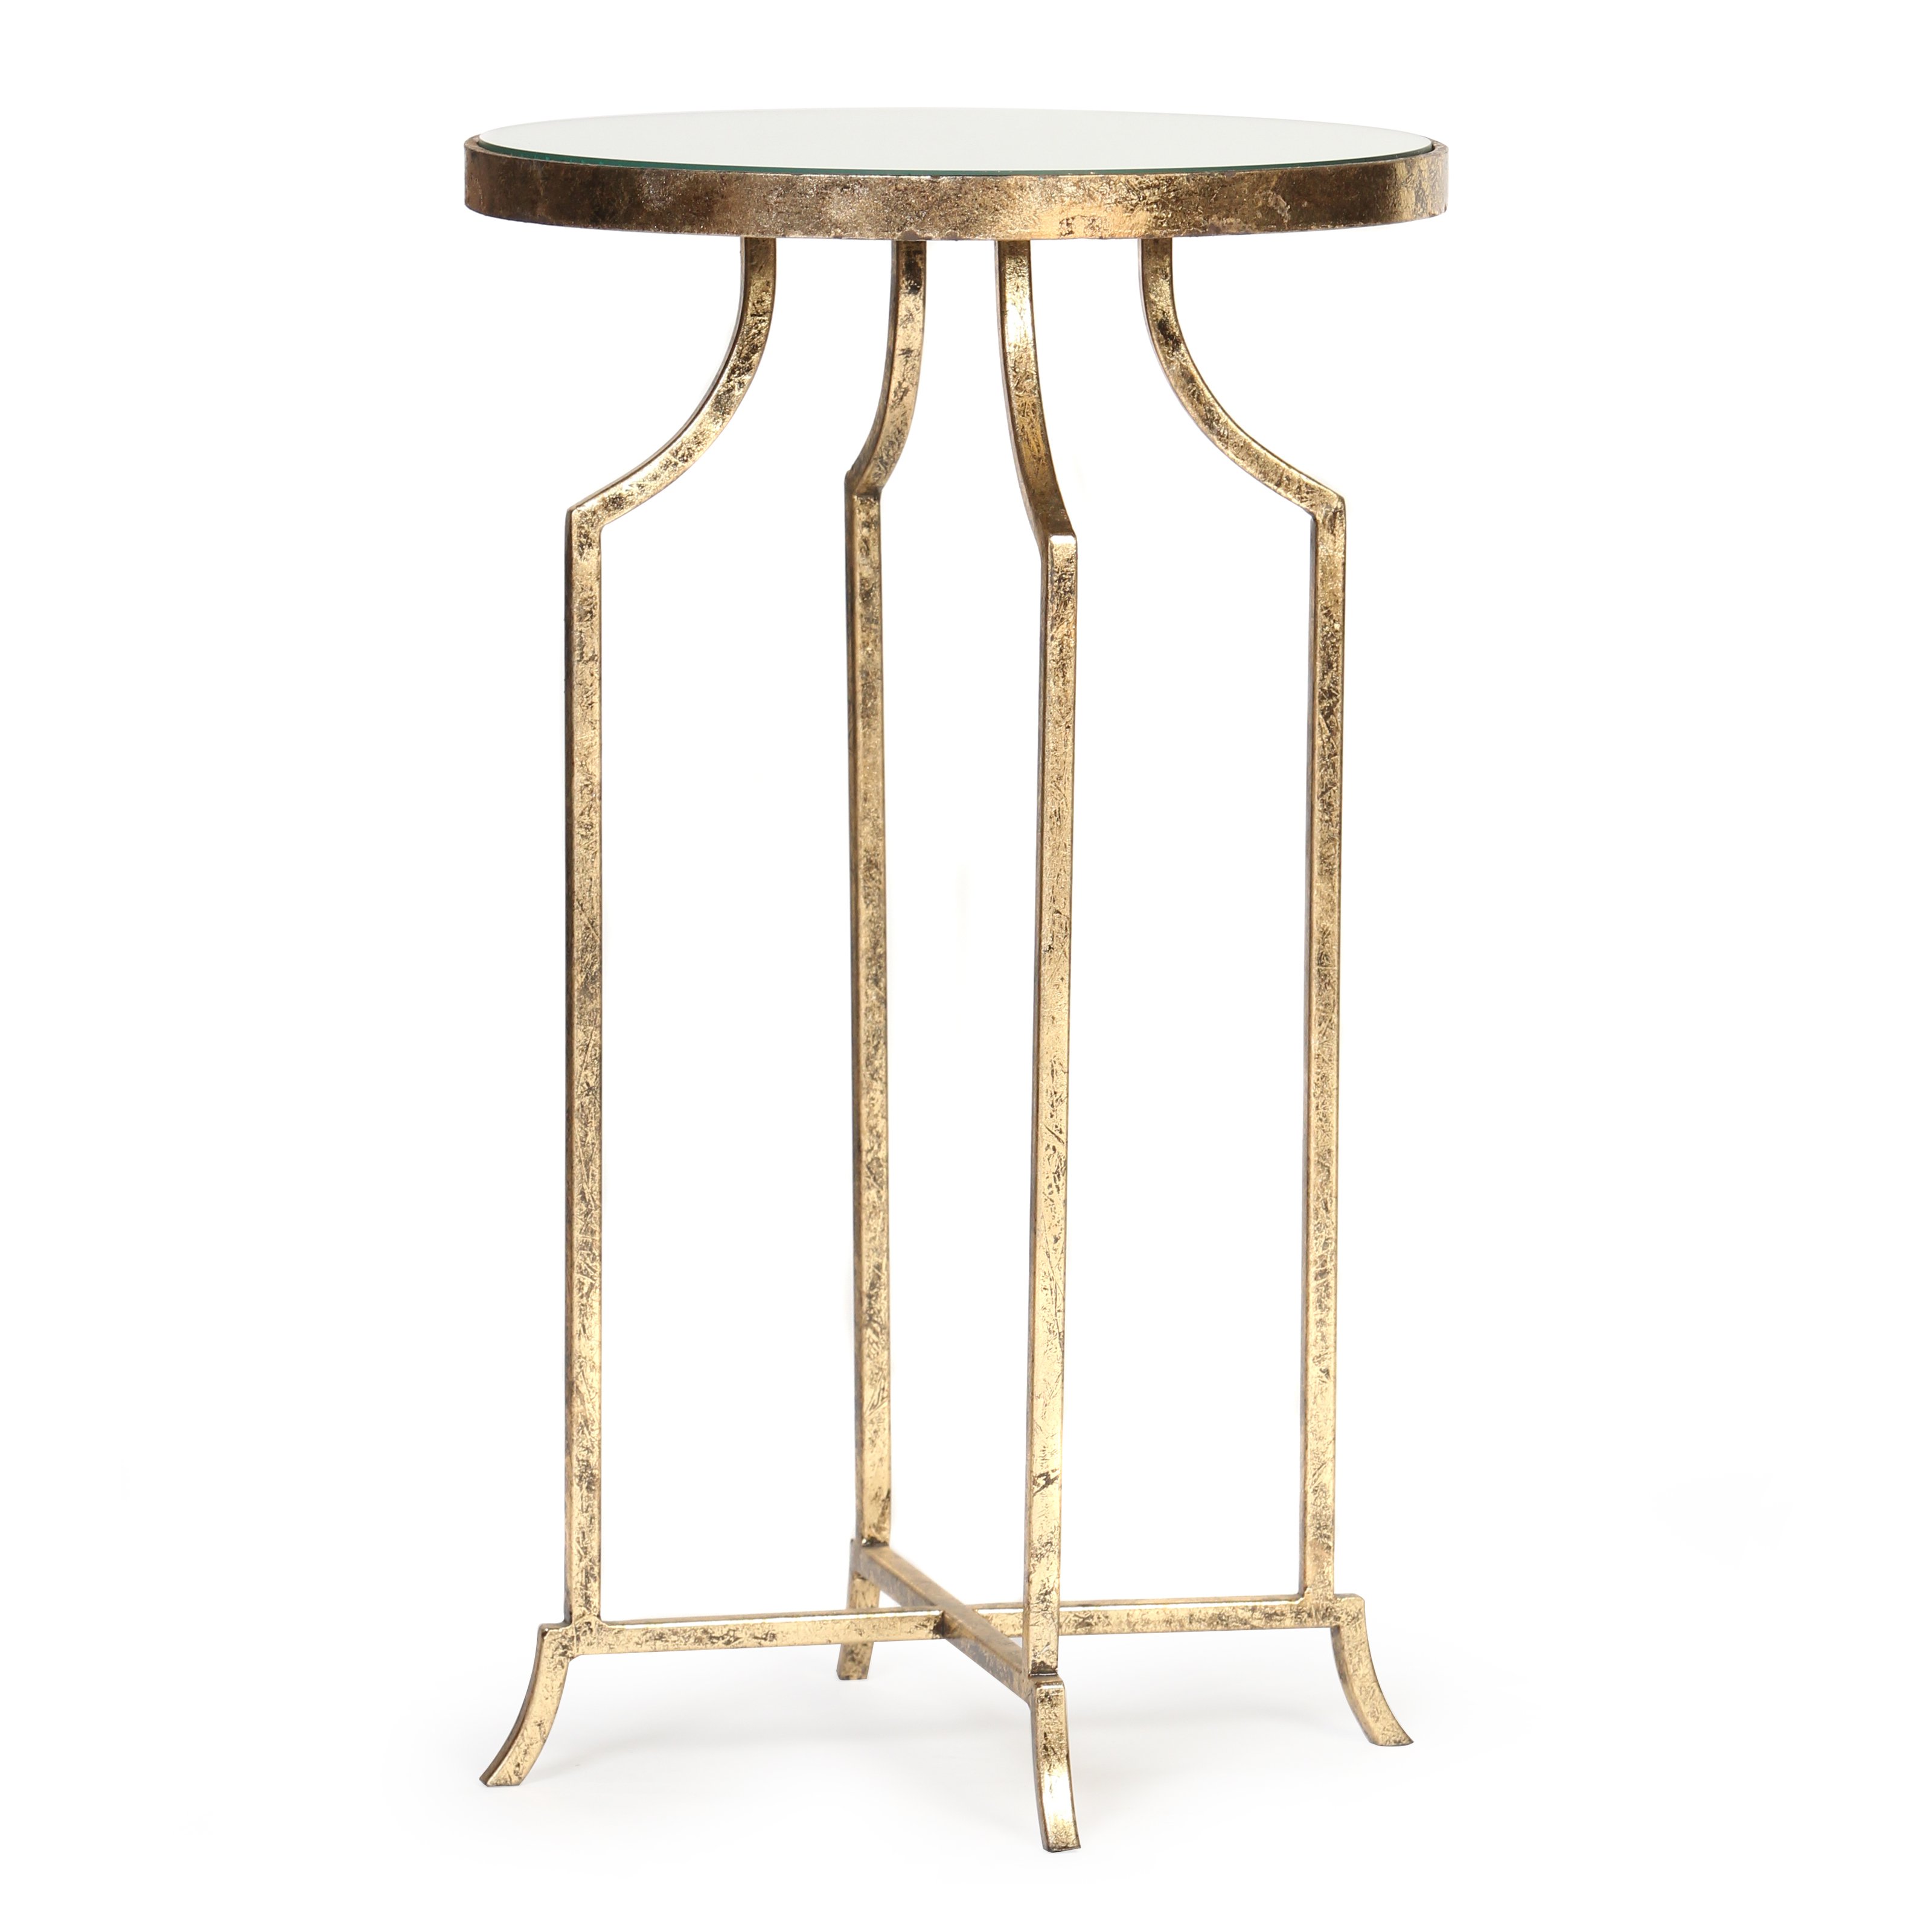 knox and harrison round accent table gold leaf master mirrored keter ice counter height half moon console cabinet outdoor lights battery teak rocking chairs pottery barn swivel